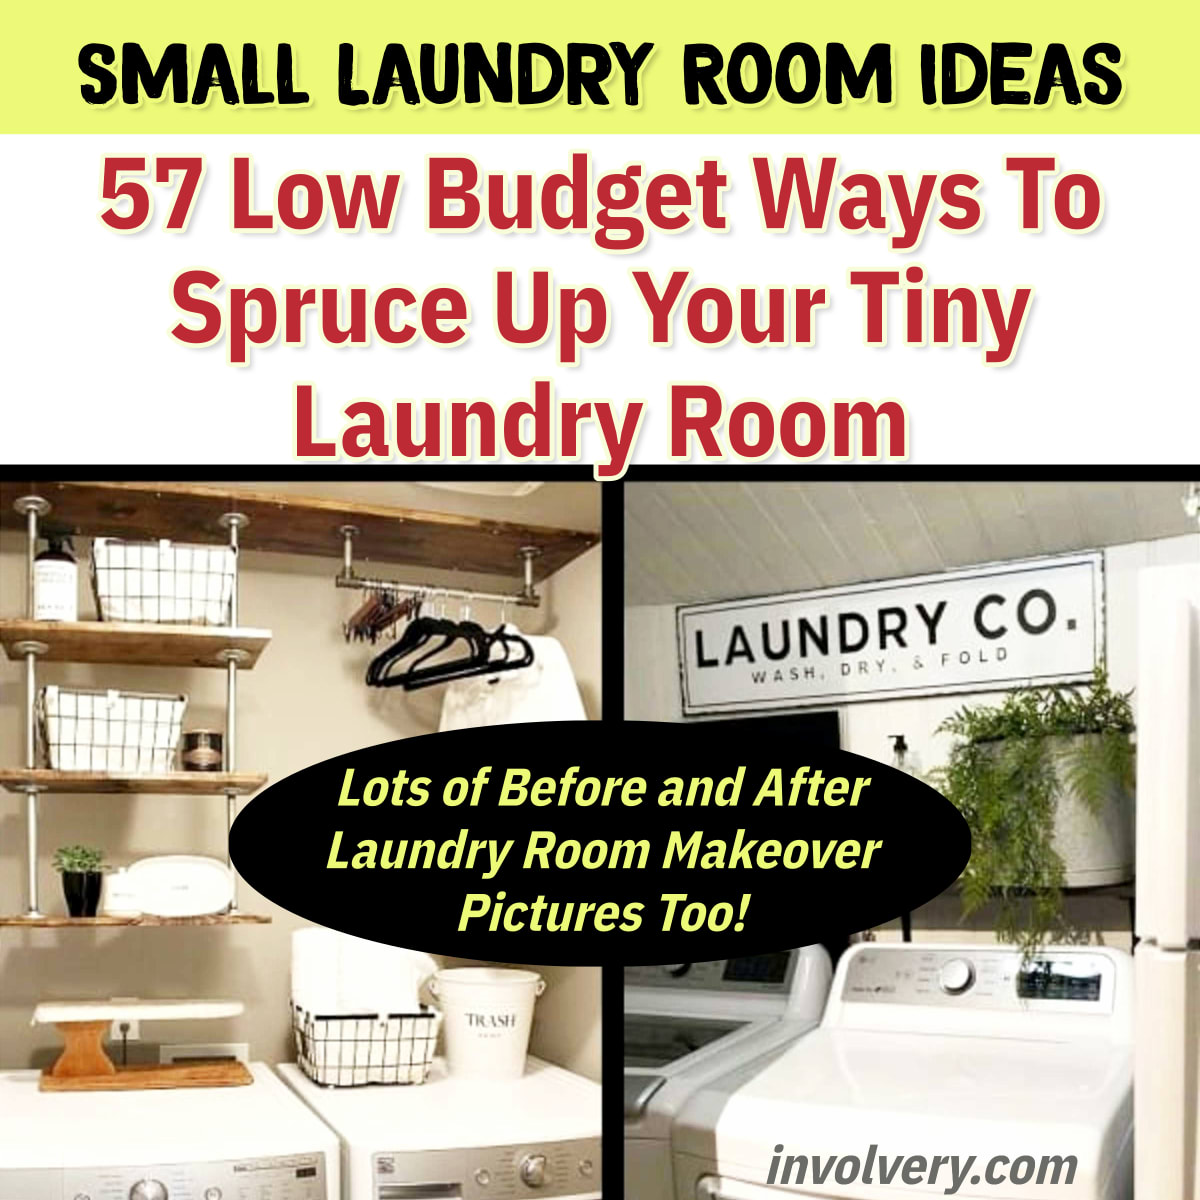 Small Laundry Room Ideas On a Budget - Low Budget Ways to Update and Spruce Up a Small Tiny Laundry Room